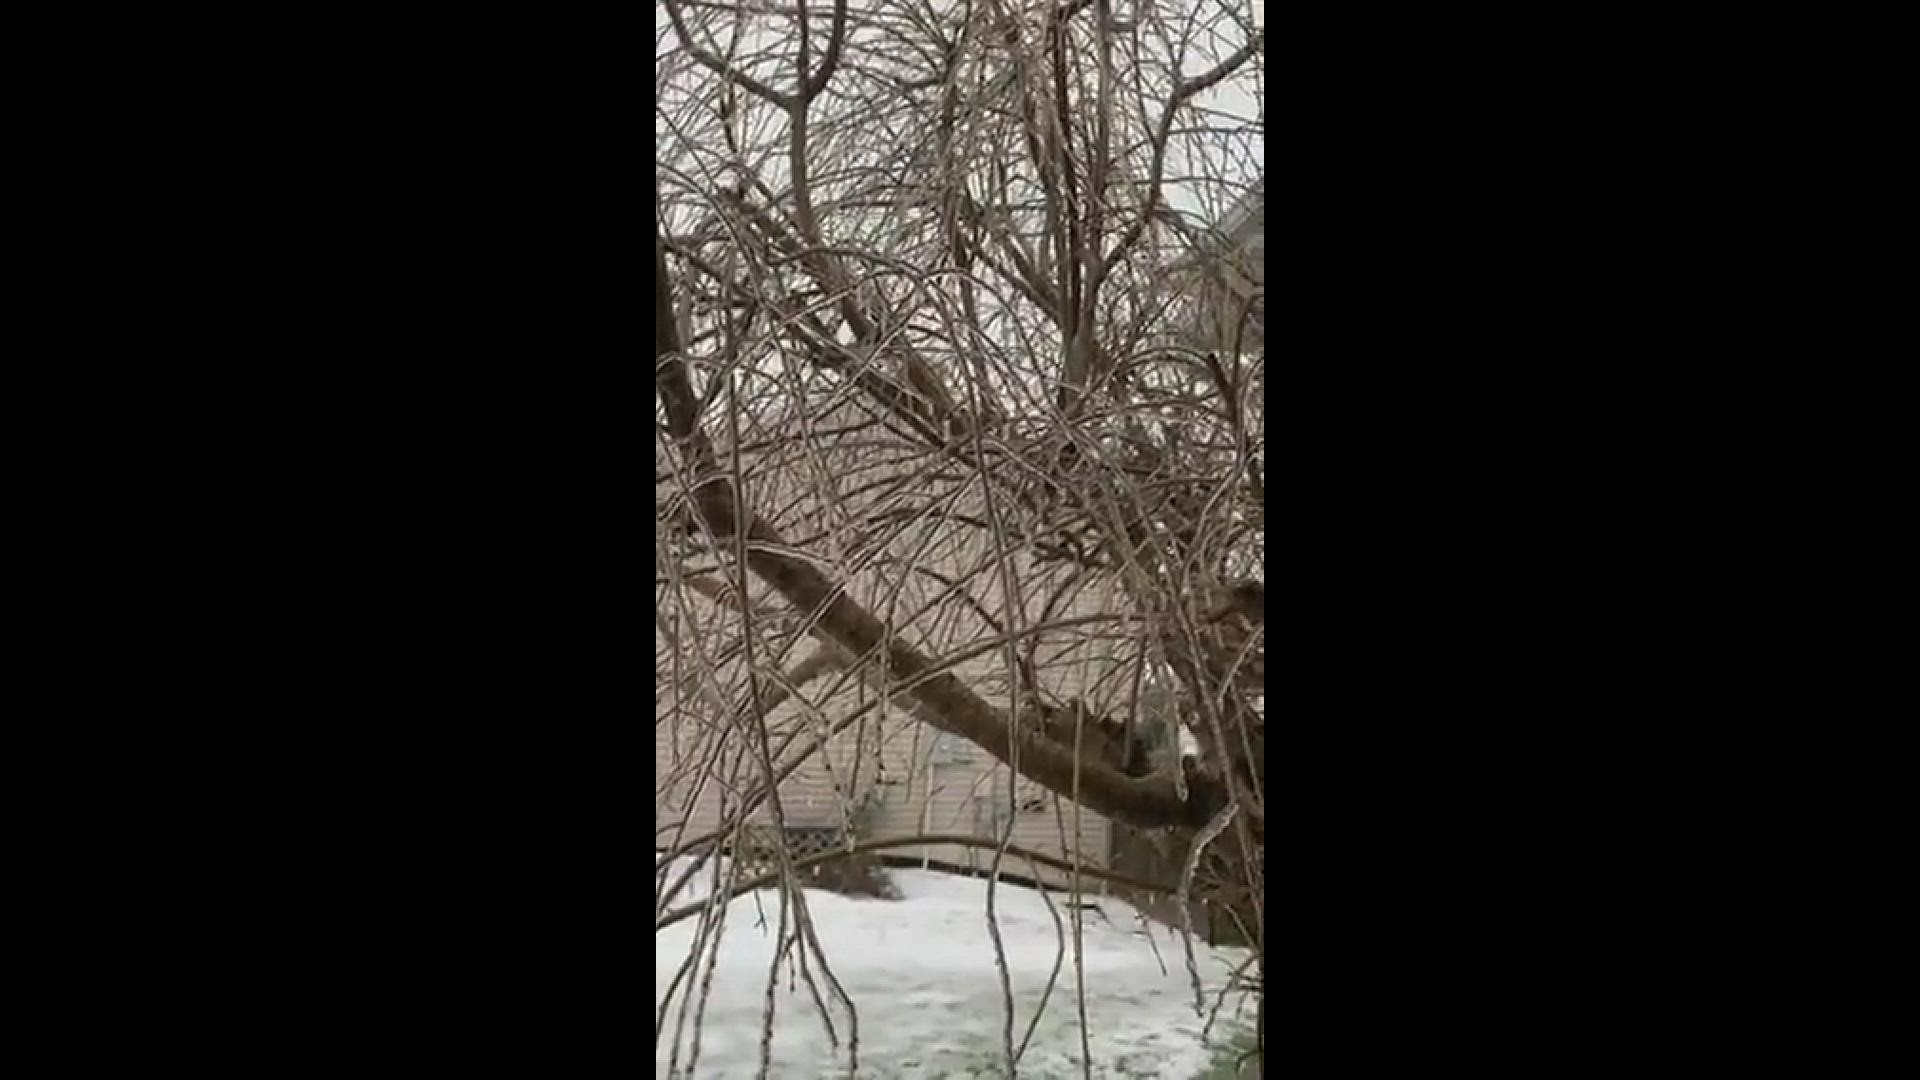 A video taken from Allendale of the freezing rain yesterday
Credit: Cassie/ Mom